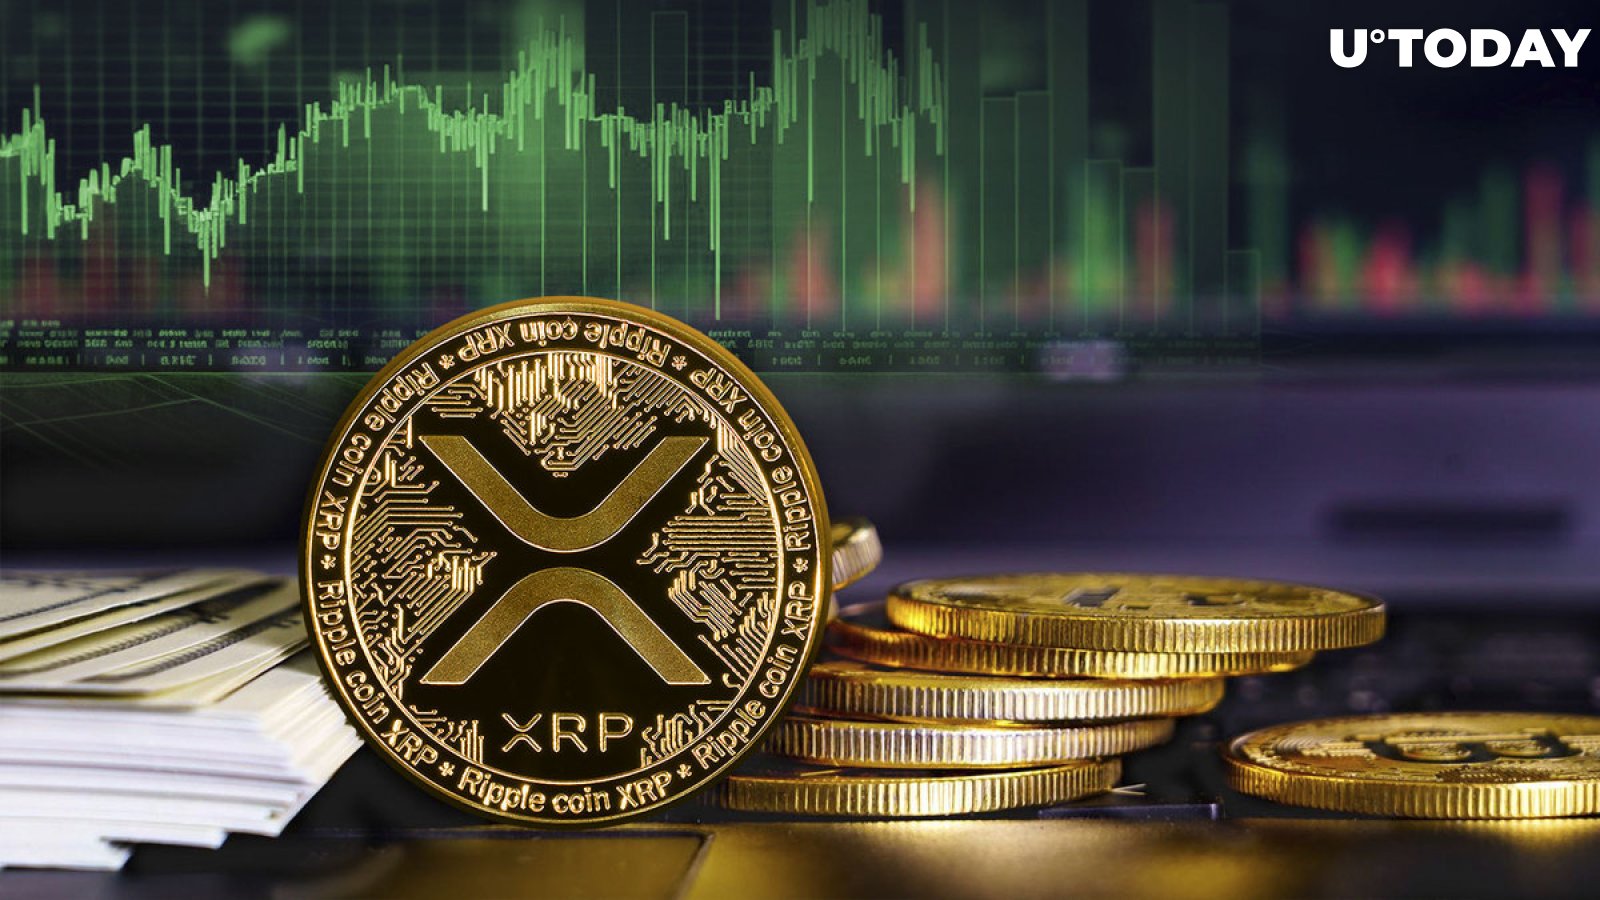 XRP Becomes Most Discussed Asset on Market, Here's Why